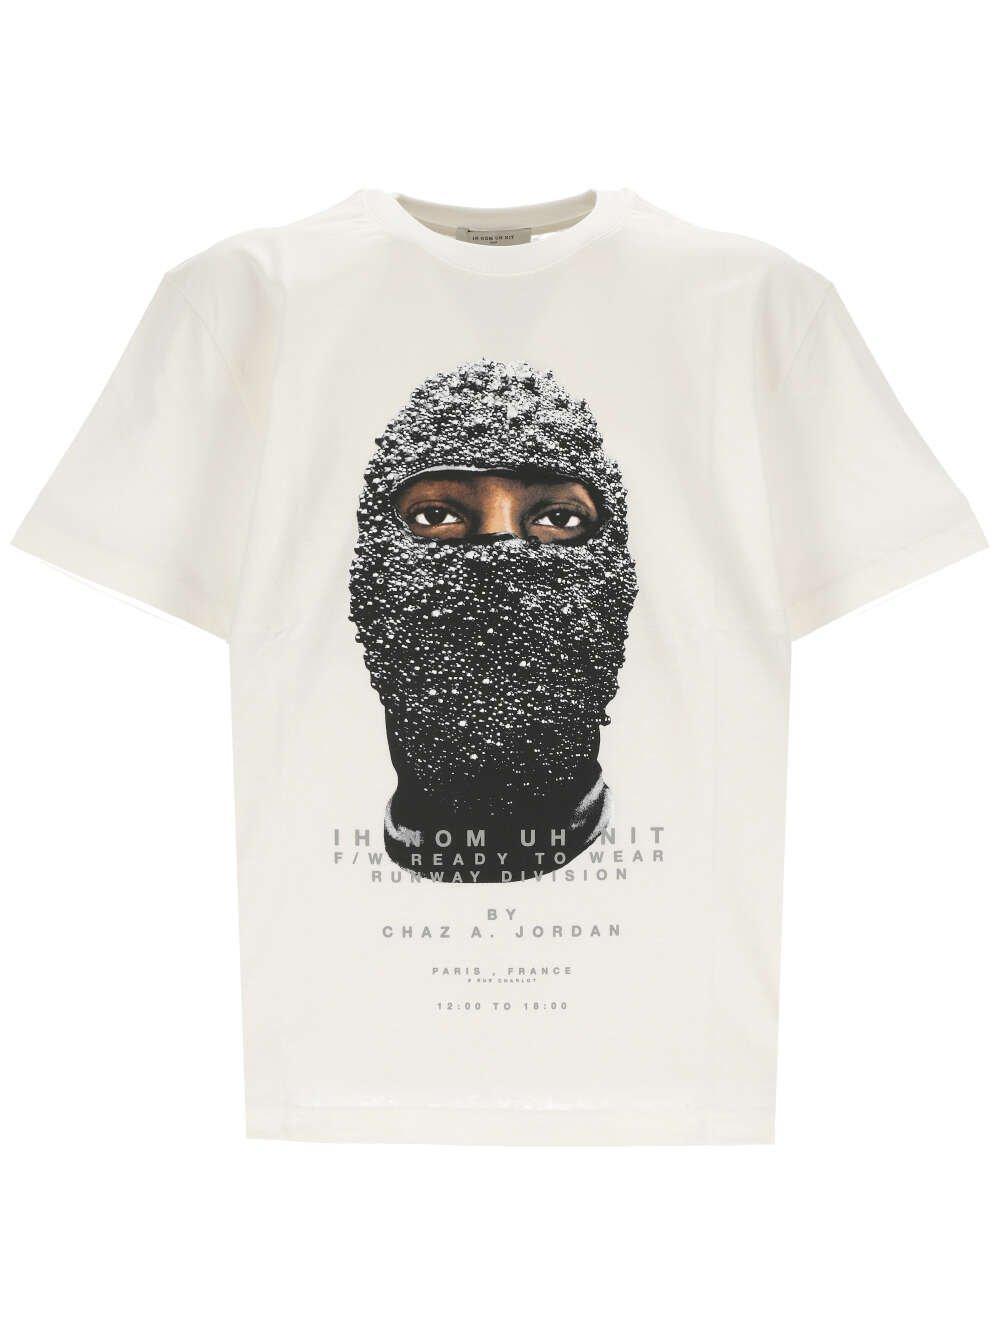 ih nom uh nit Graphic Printed Crewneck T-shirt in White for Men | Lyst